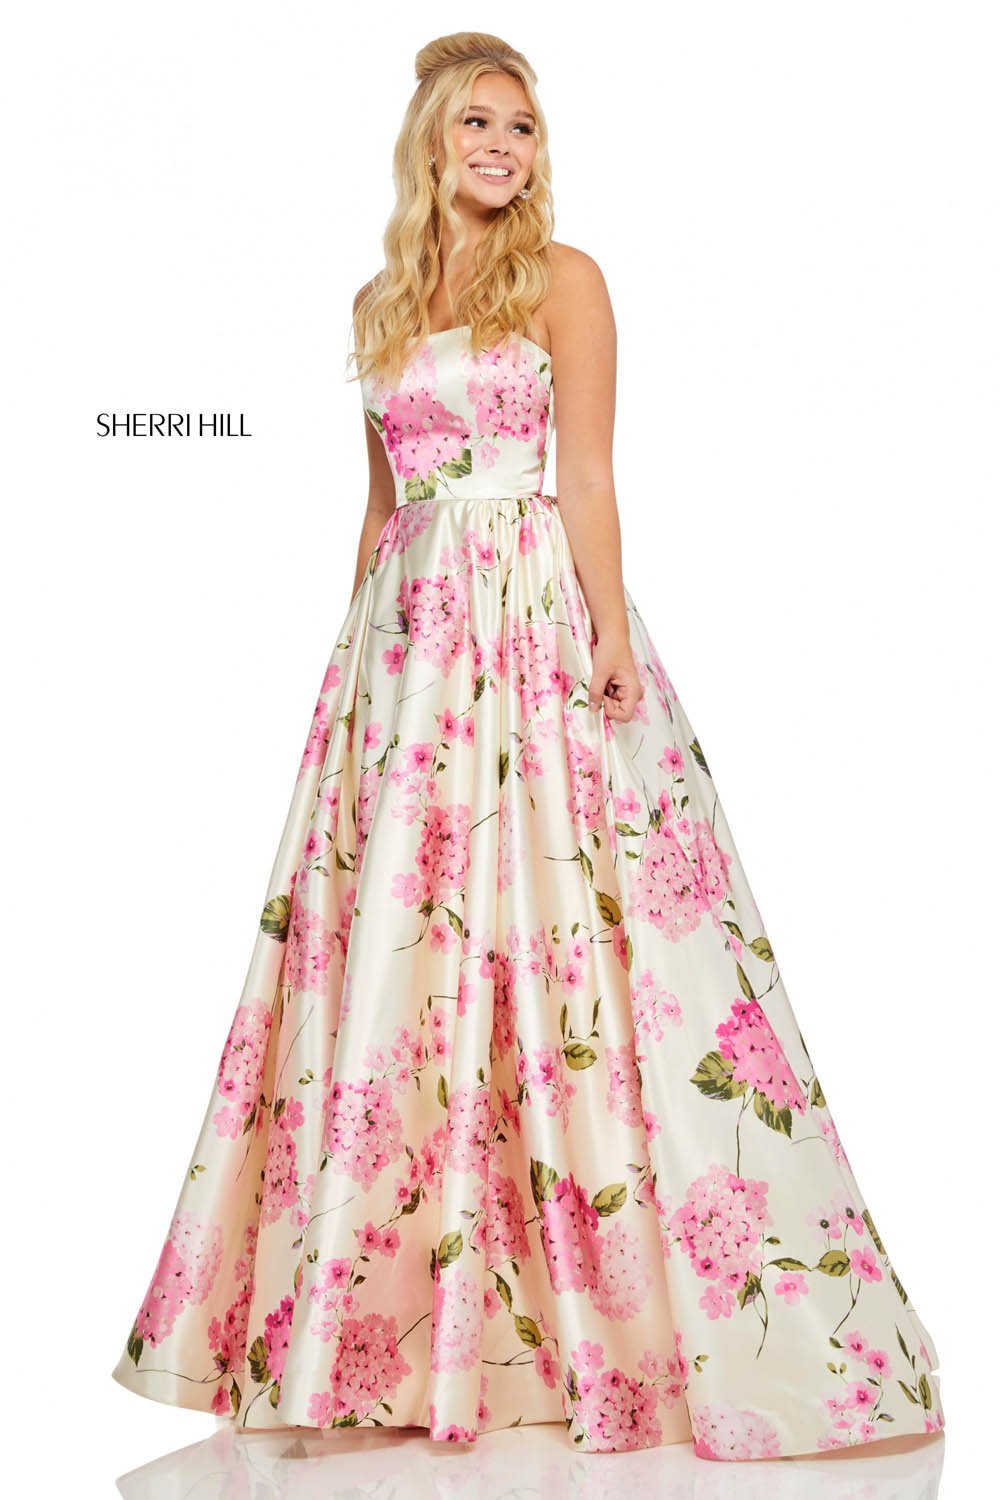 Sherri Hill 52723 dress images in these colors: Ivory Lilac Print, Ivory Pink Print.